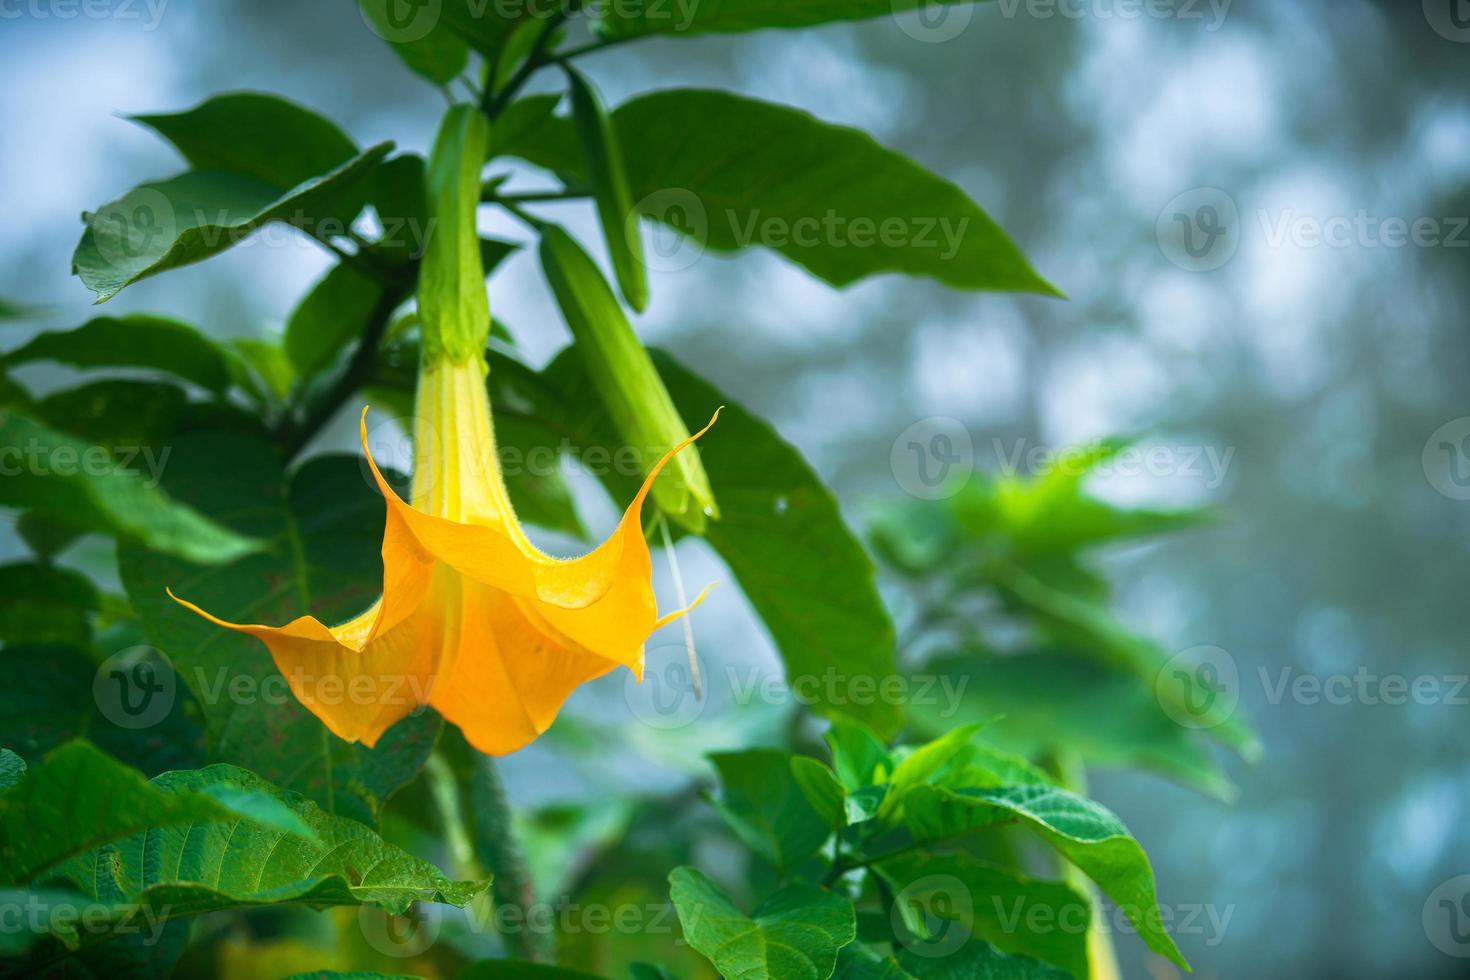 Brugmansia, a genus of seven species of flowering plants in the family Solanaceae photo